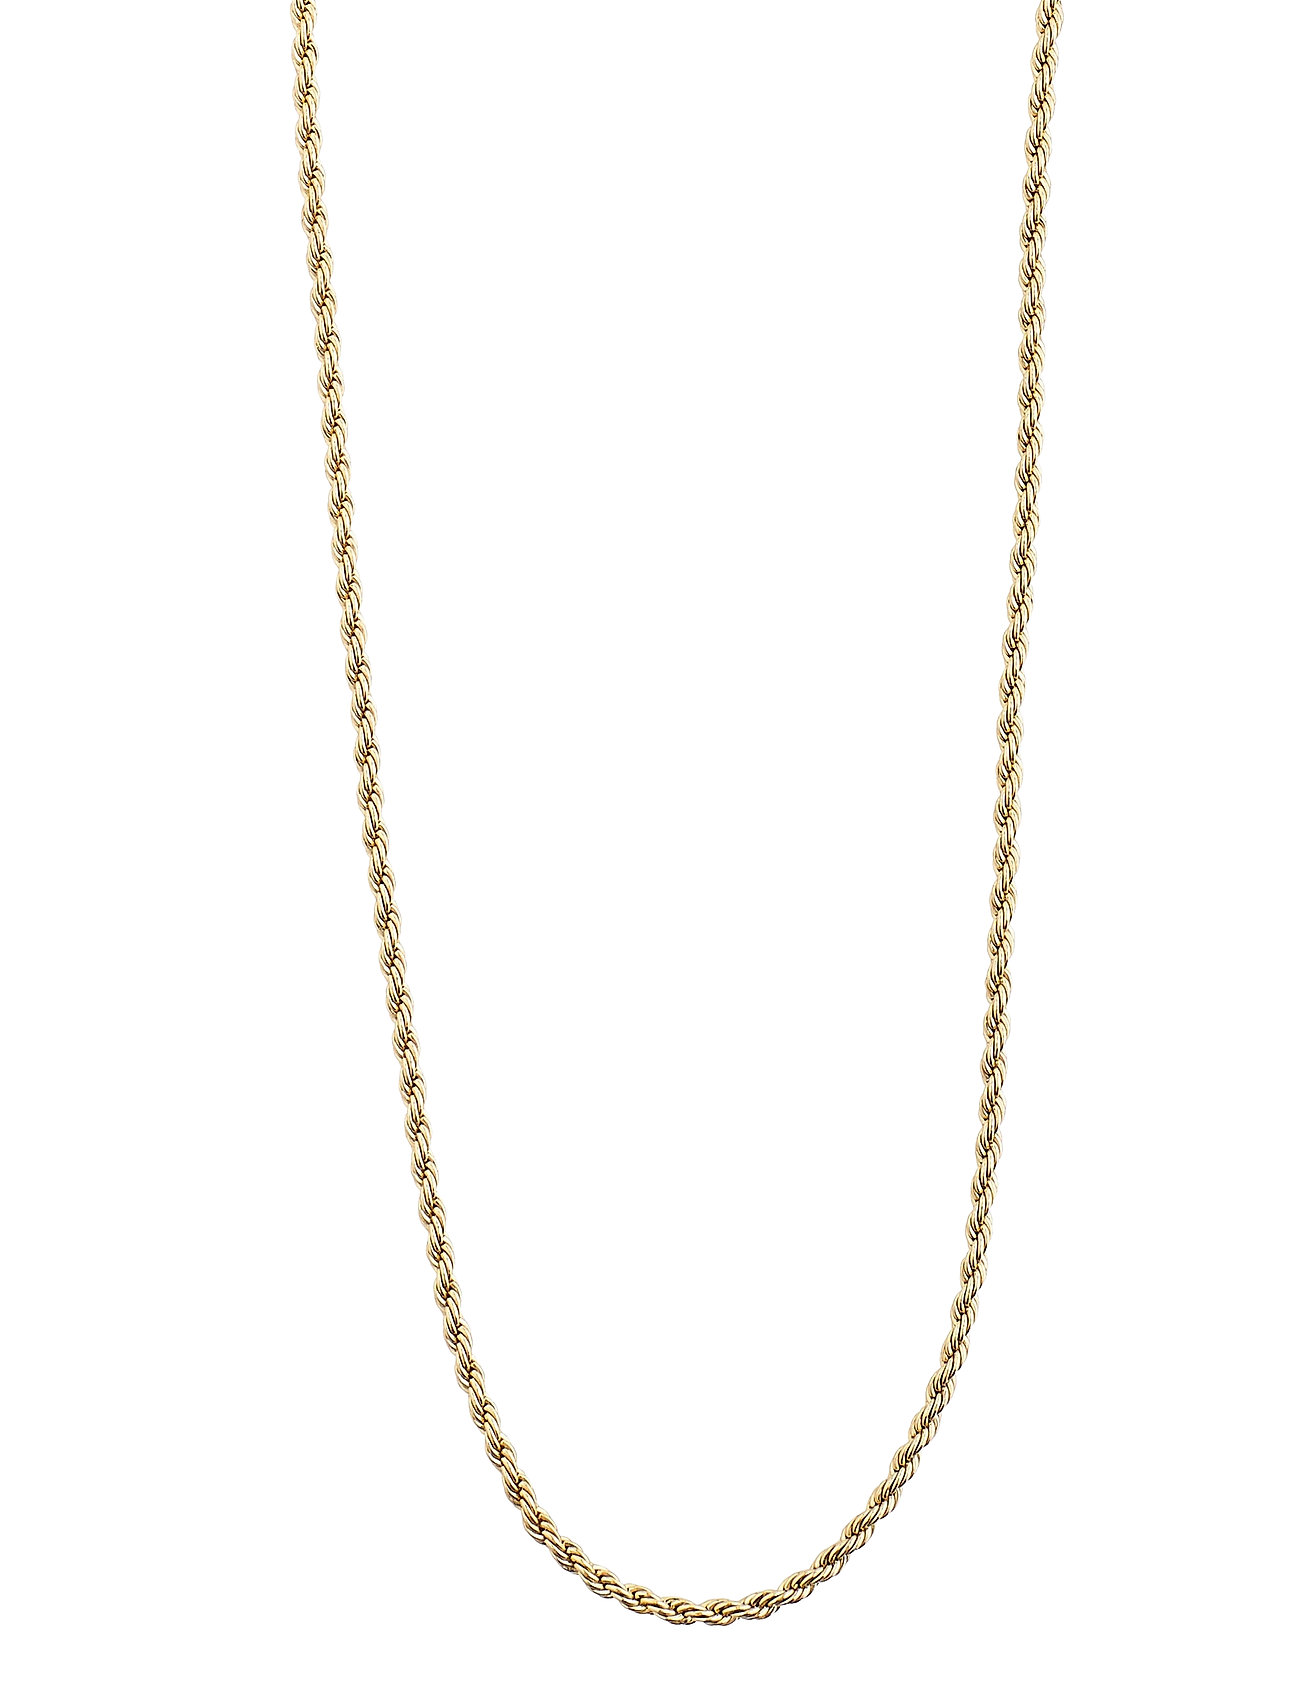 Necklace : Pam : Gold Plated Accessories Jewellery Necklaces Chain Necklaces Kulta Pilgrim